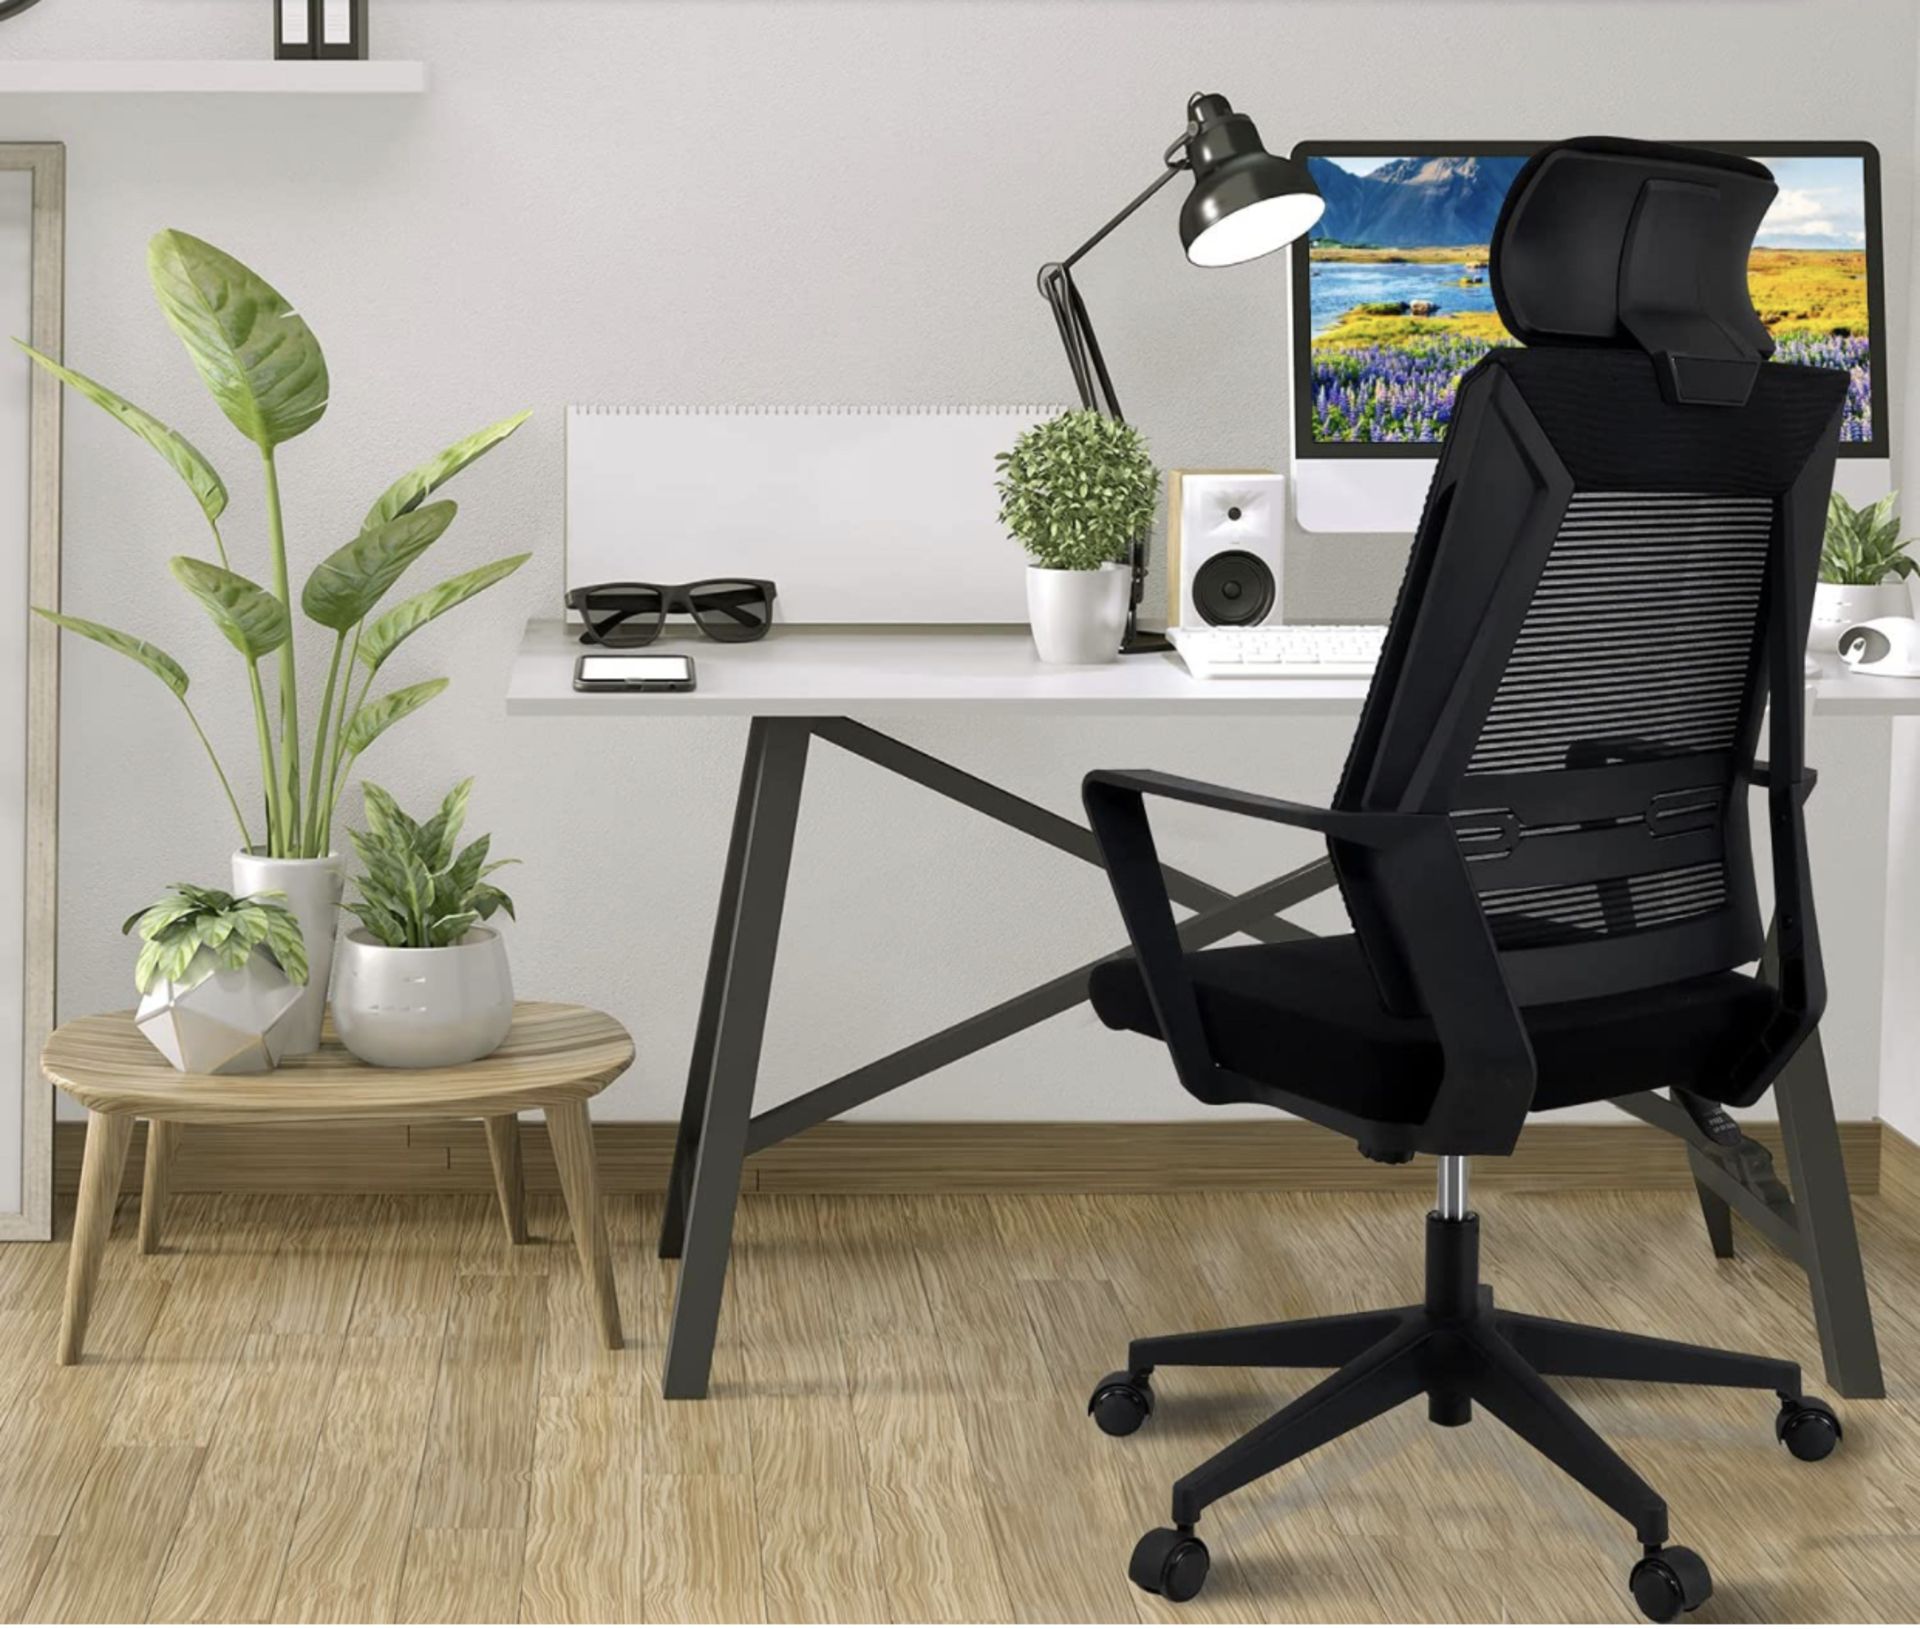 KLIM K300 Office Chair, Ergonomic with back support and headrest, Soft Cushions RRP £115.99